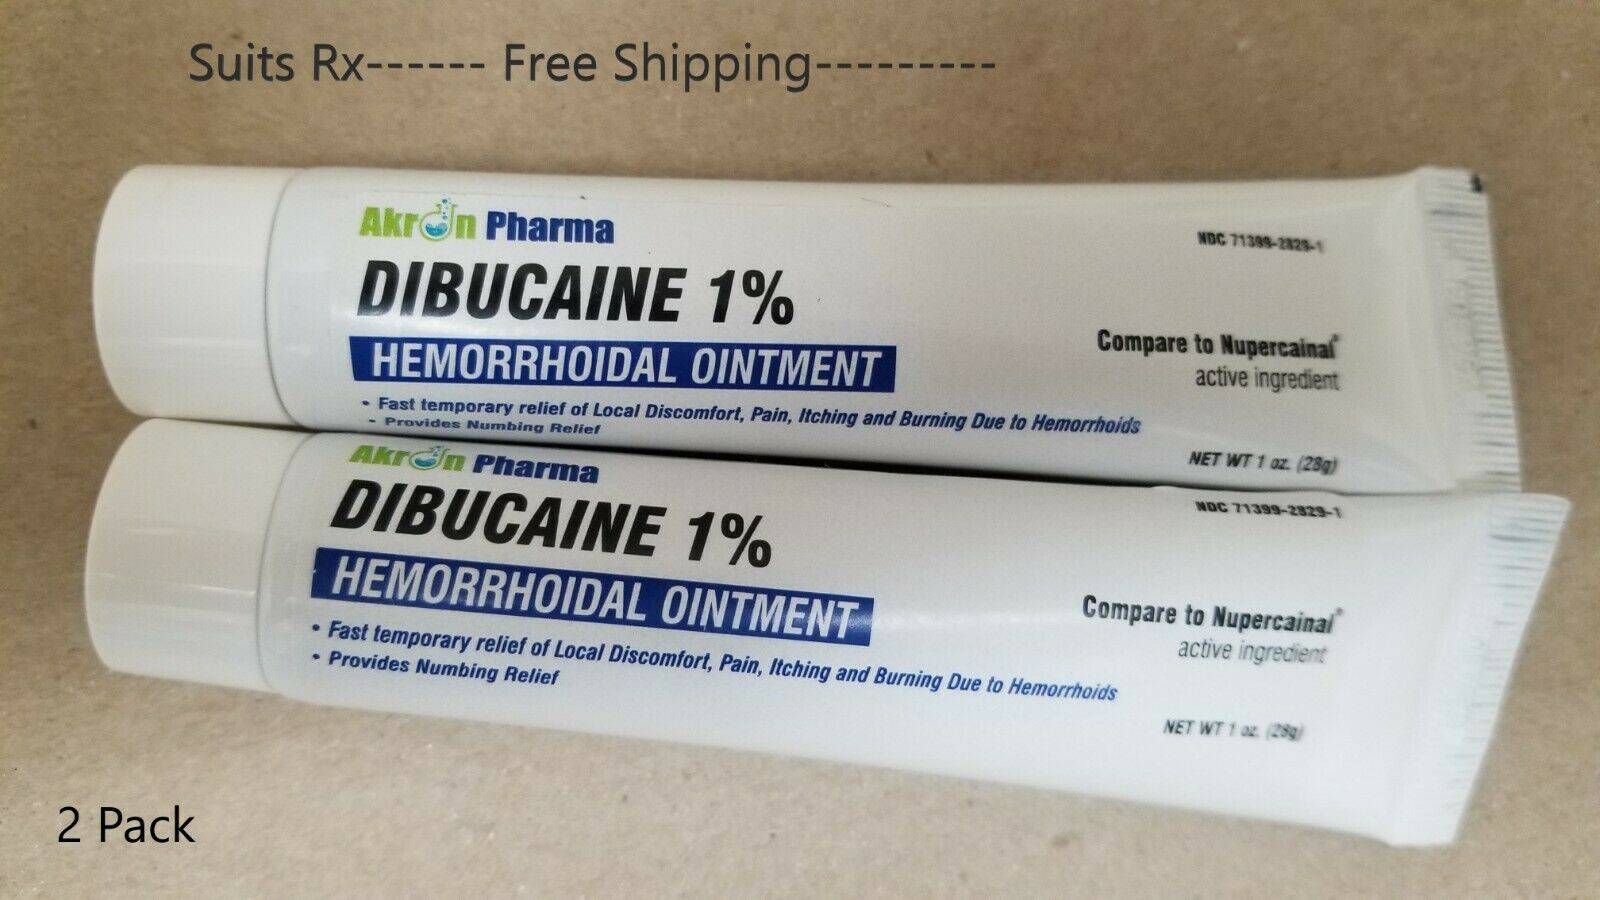 Dibucaine 1% Hemorrhoidal Ointmemt 2 Pack!! Exp 11/22 Free Shipping